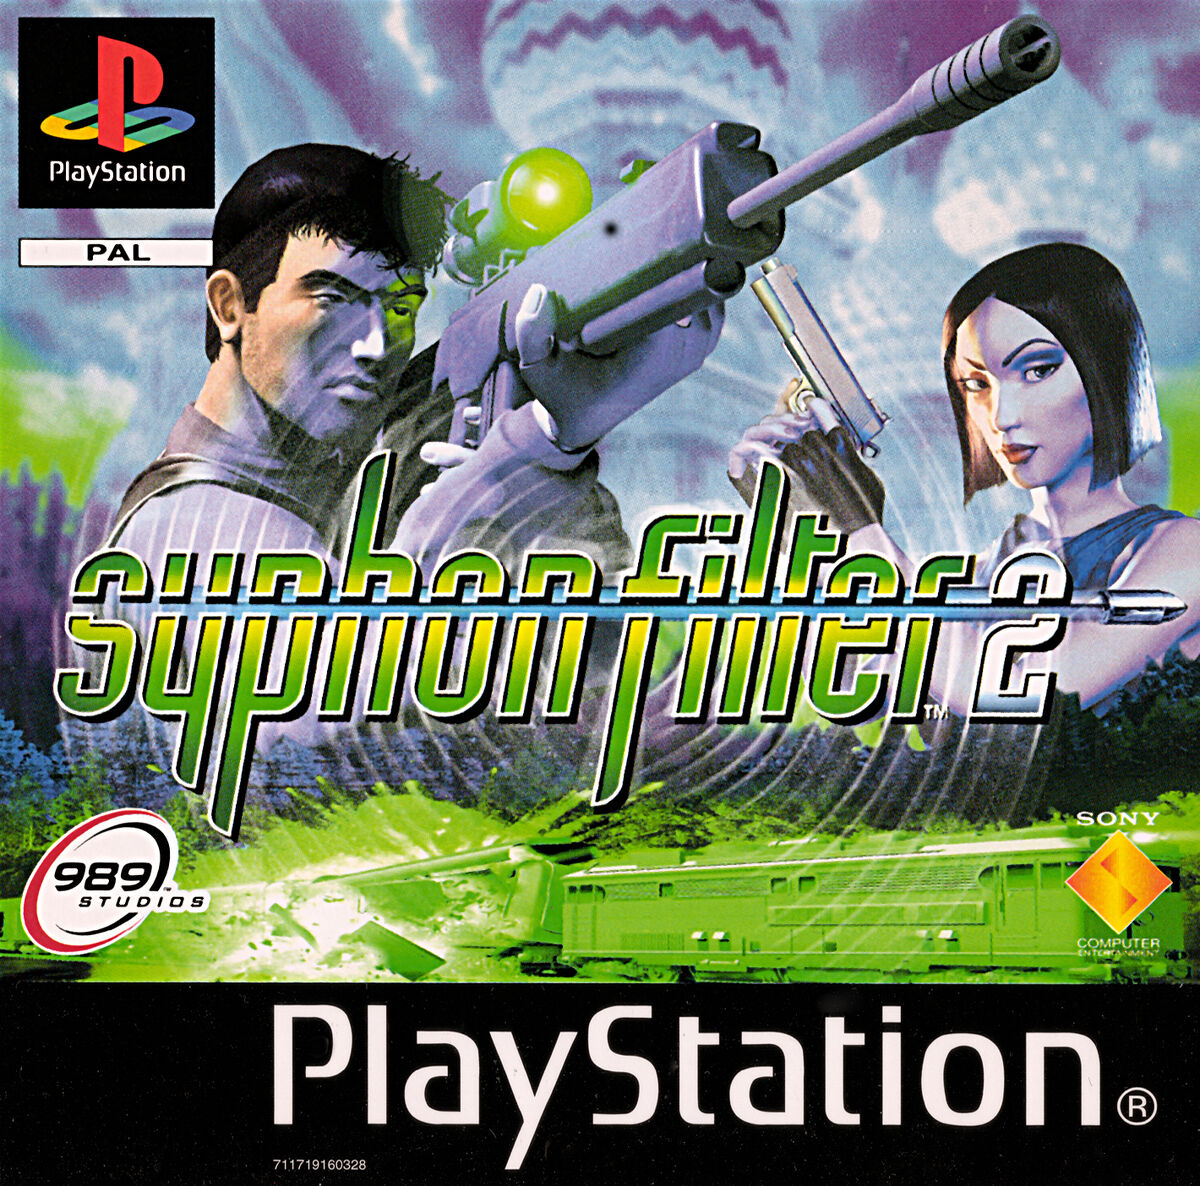 Syphon Filter 2 (PS1) chip (for PS1, PS2 with chip installed)